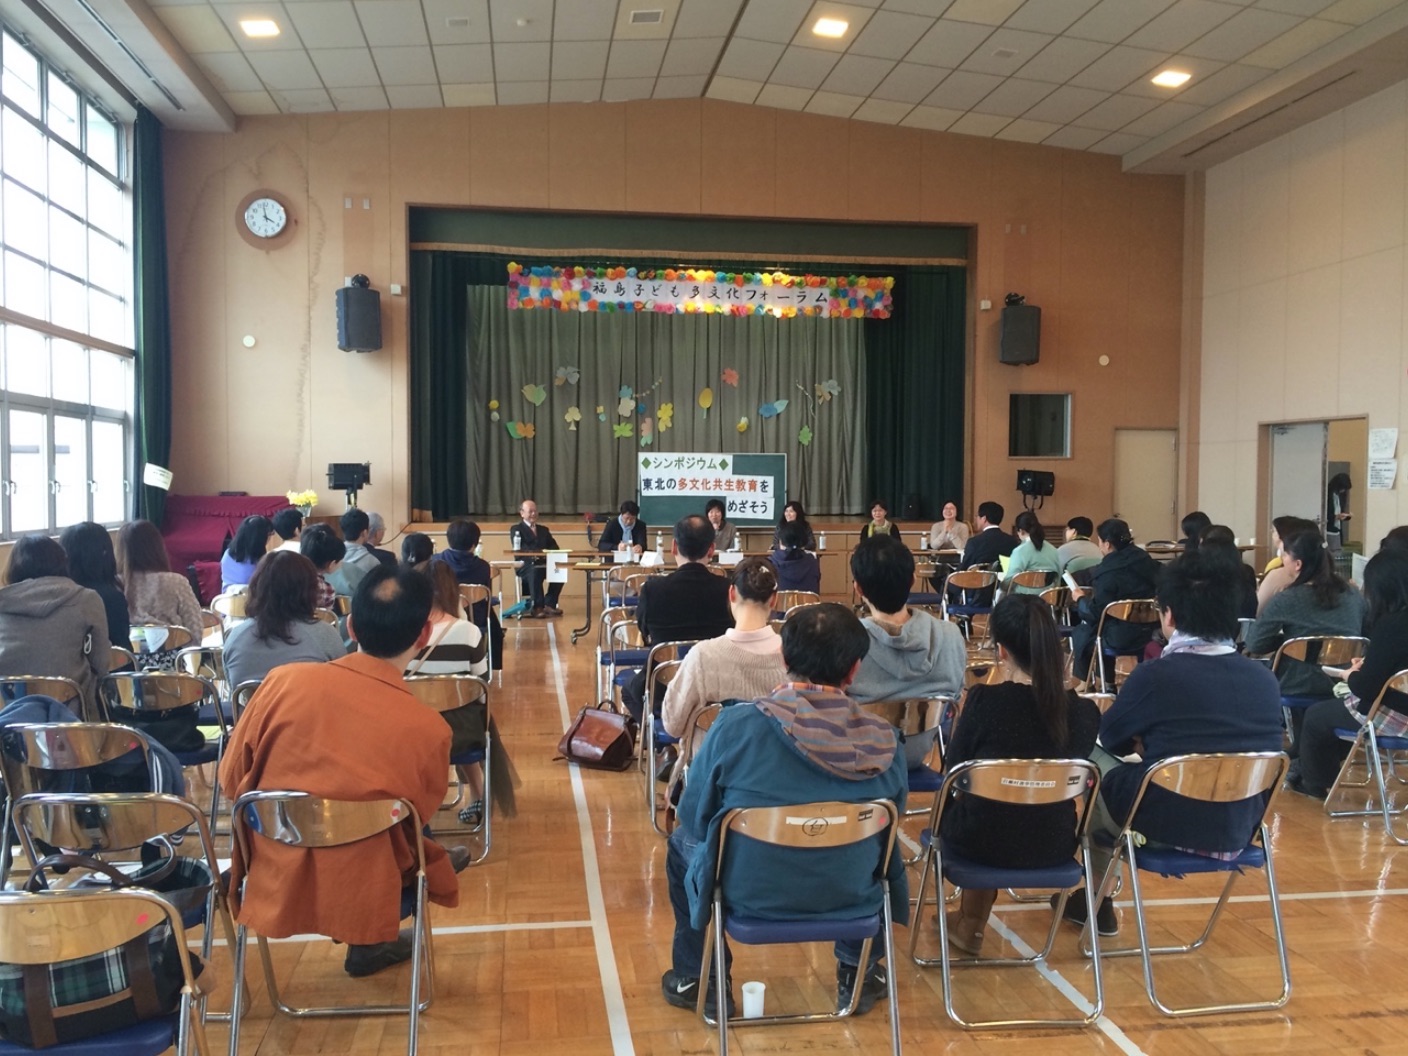 Fukushima Children Multicultural Forum was held on April 5, 2015 in Sukagawa, Fukushima prefecture. Marriage migrant women in the disaster-affected areas are taking the lead in appealing multicultural education to the community.